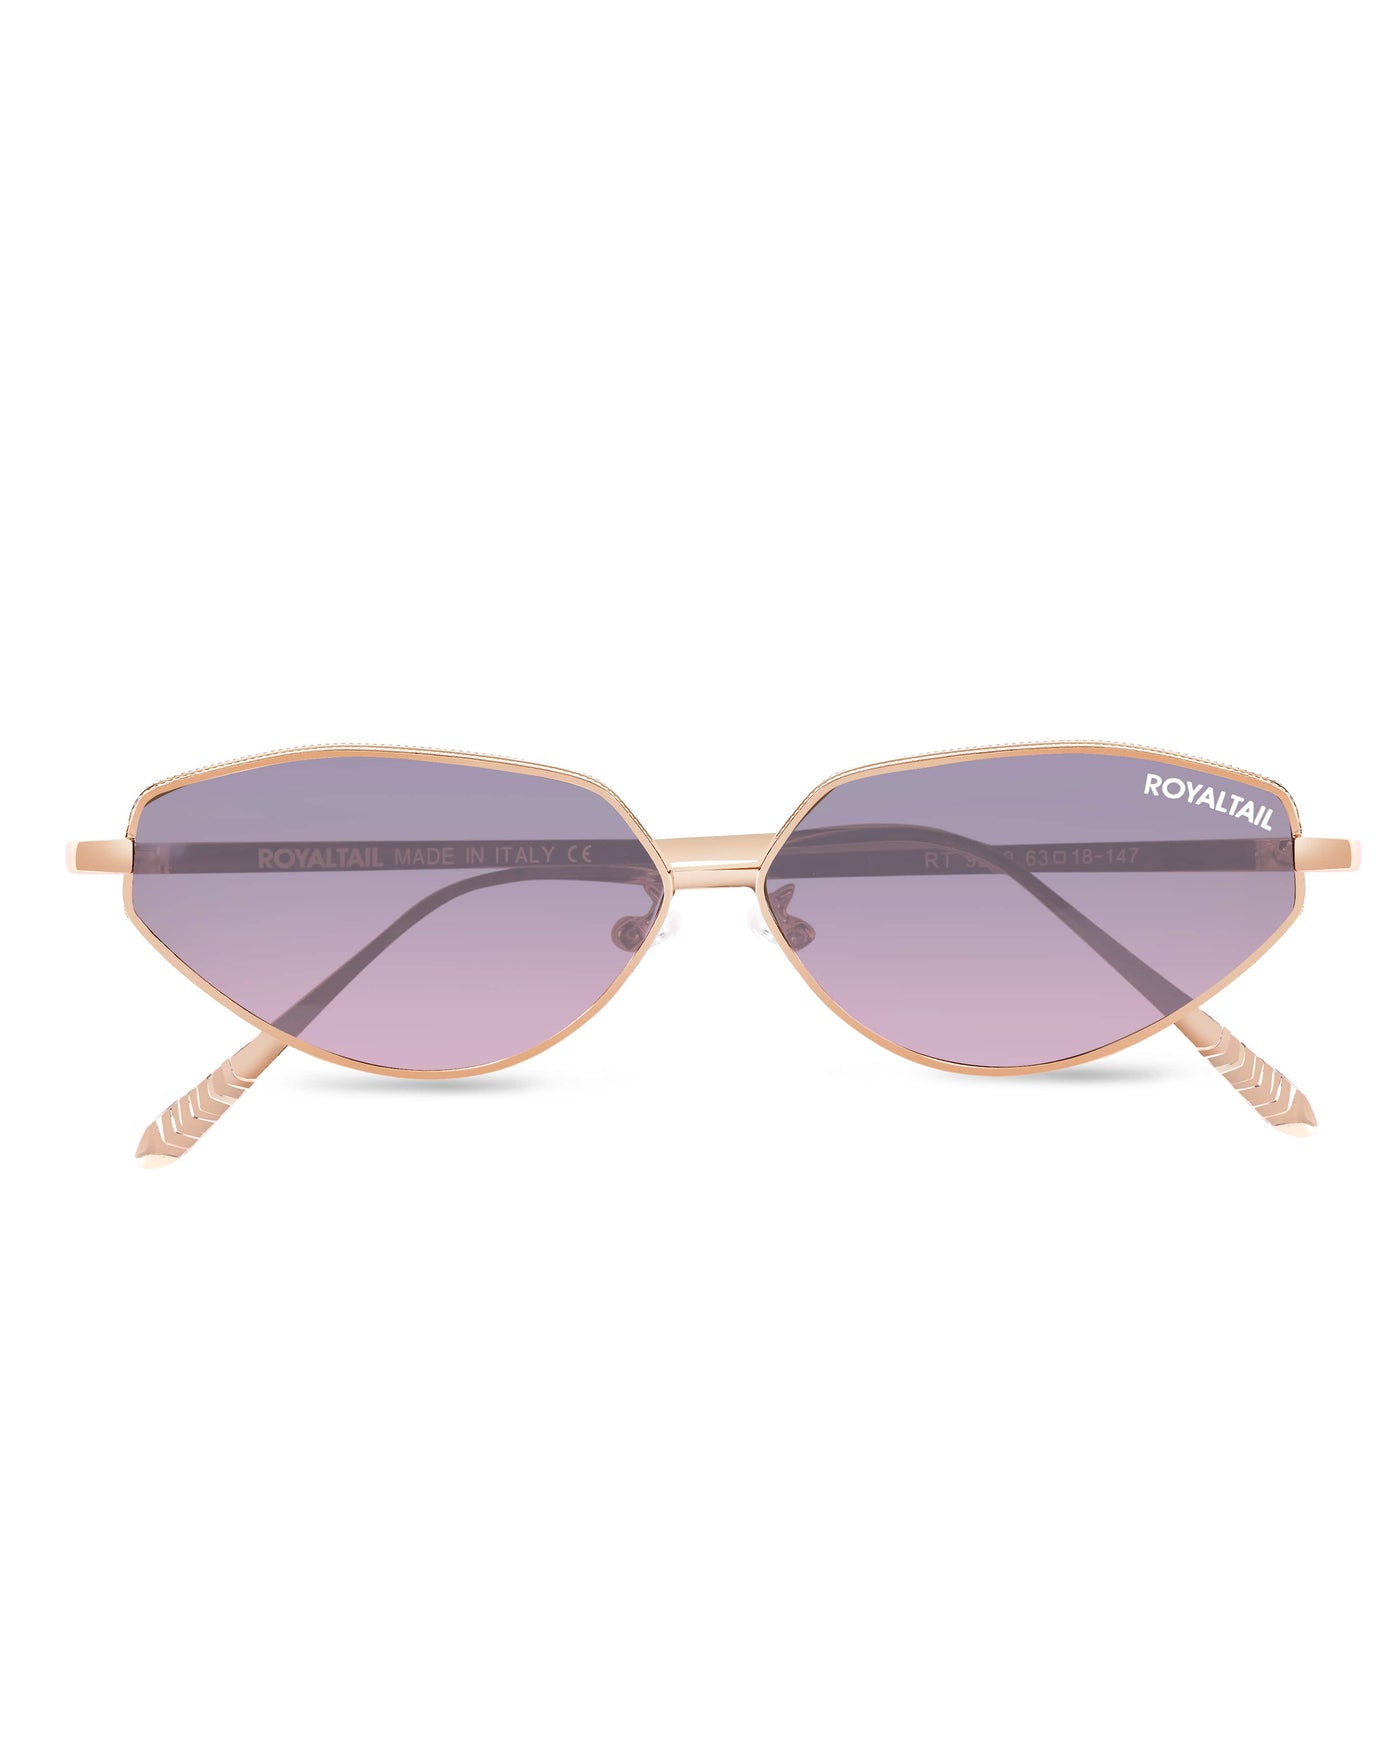 Classic Designer Pink & Gold-Toned UV Protected Cat Eyes Sunglasses RT054